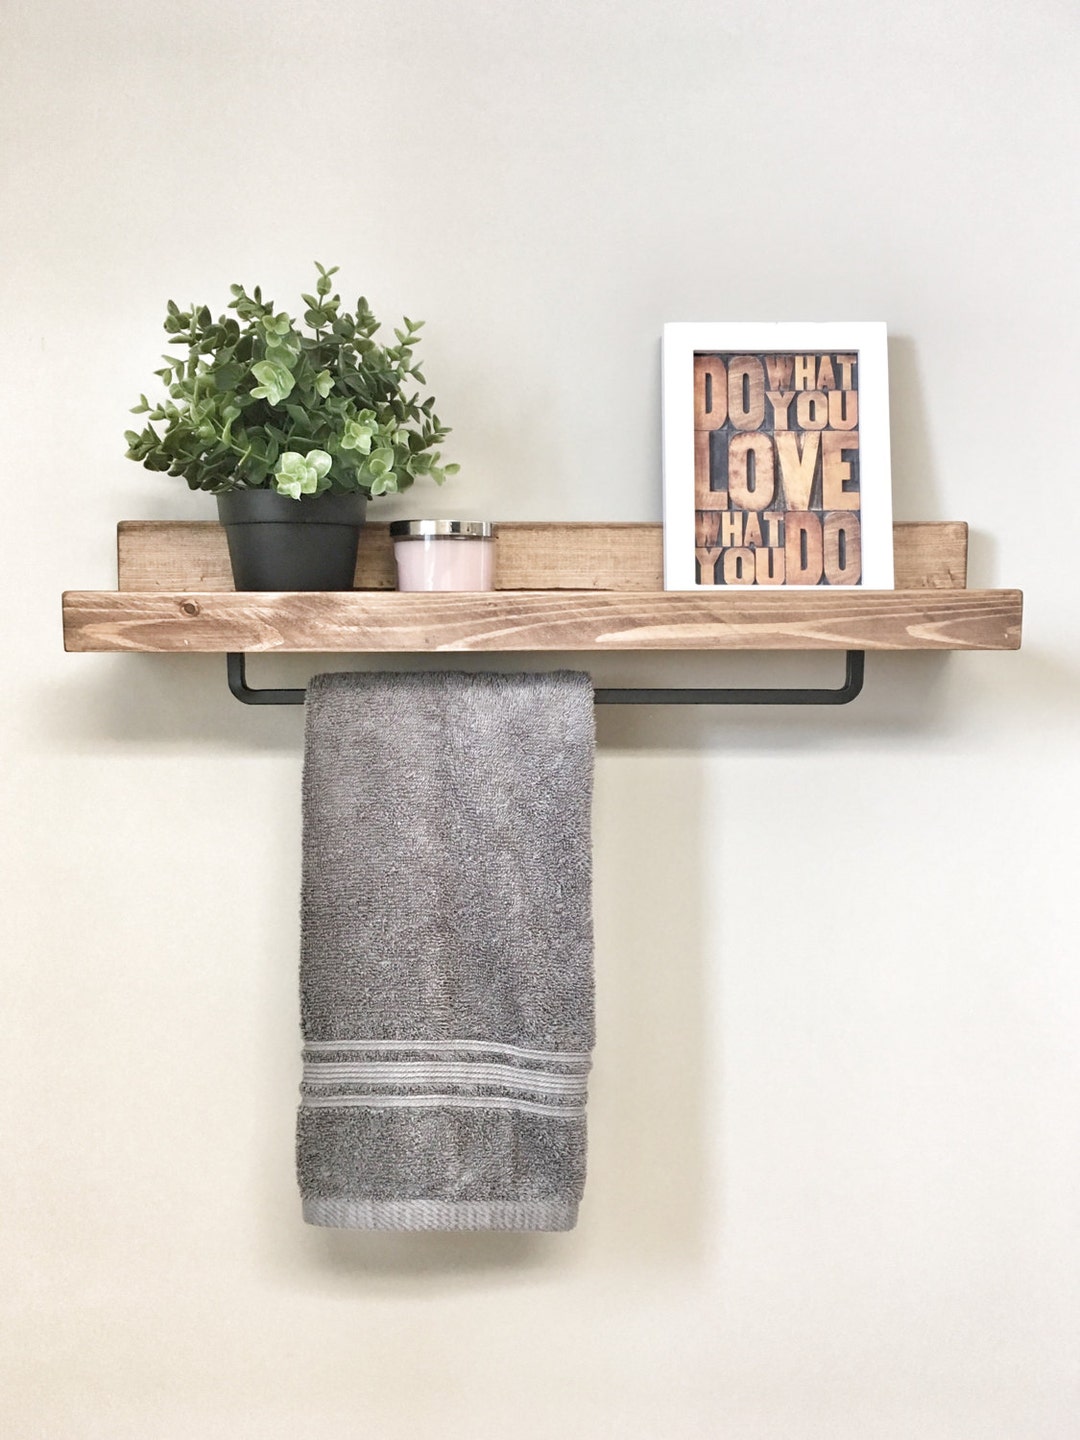 Indoor and Outdoor Dark Brown Wooden Wall Mounted Plant Shelves with 1  Towel Bar, Storage Organizer (Set of 3)